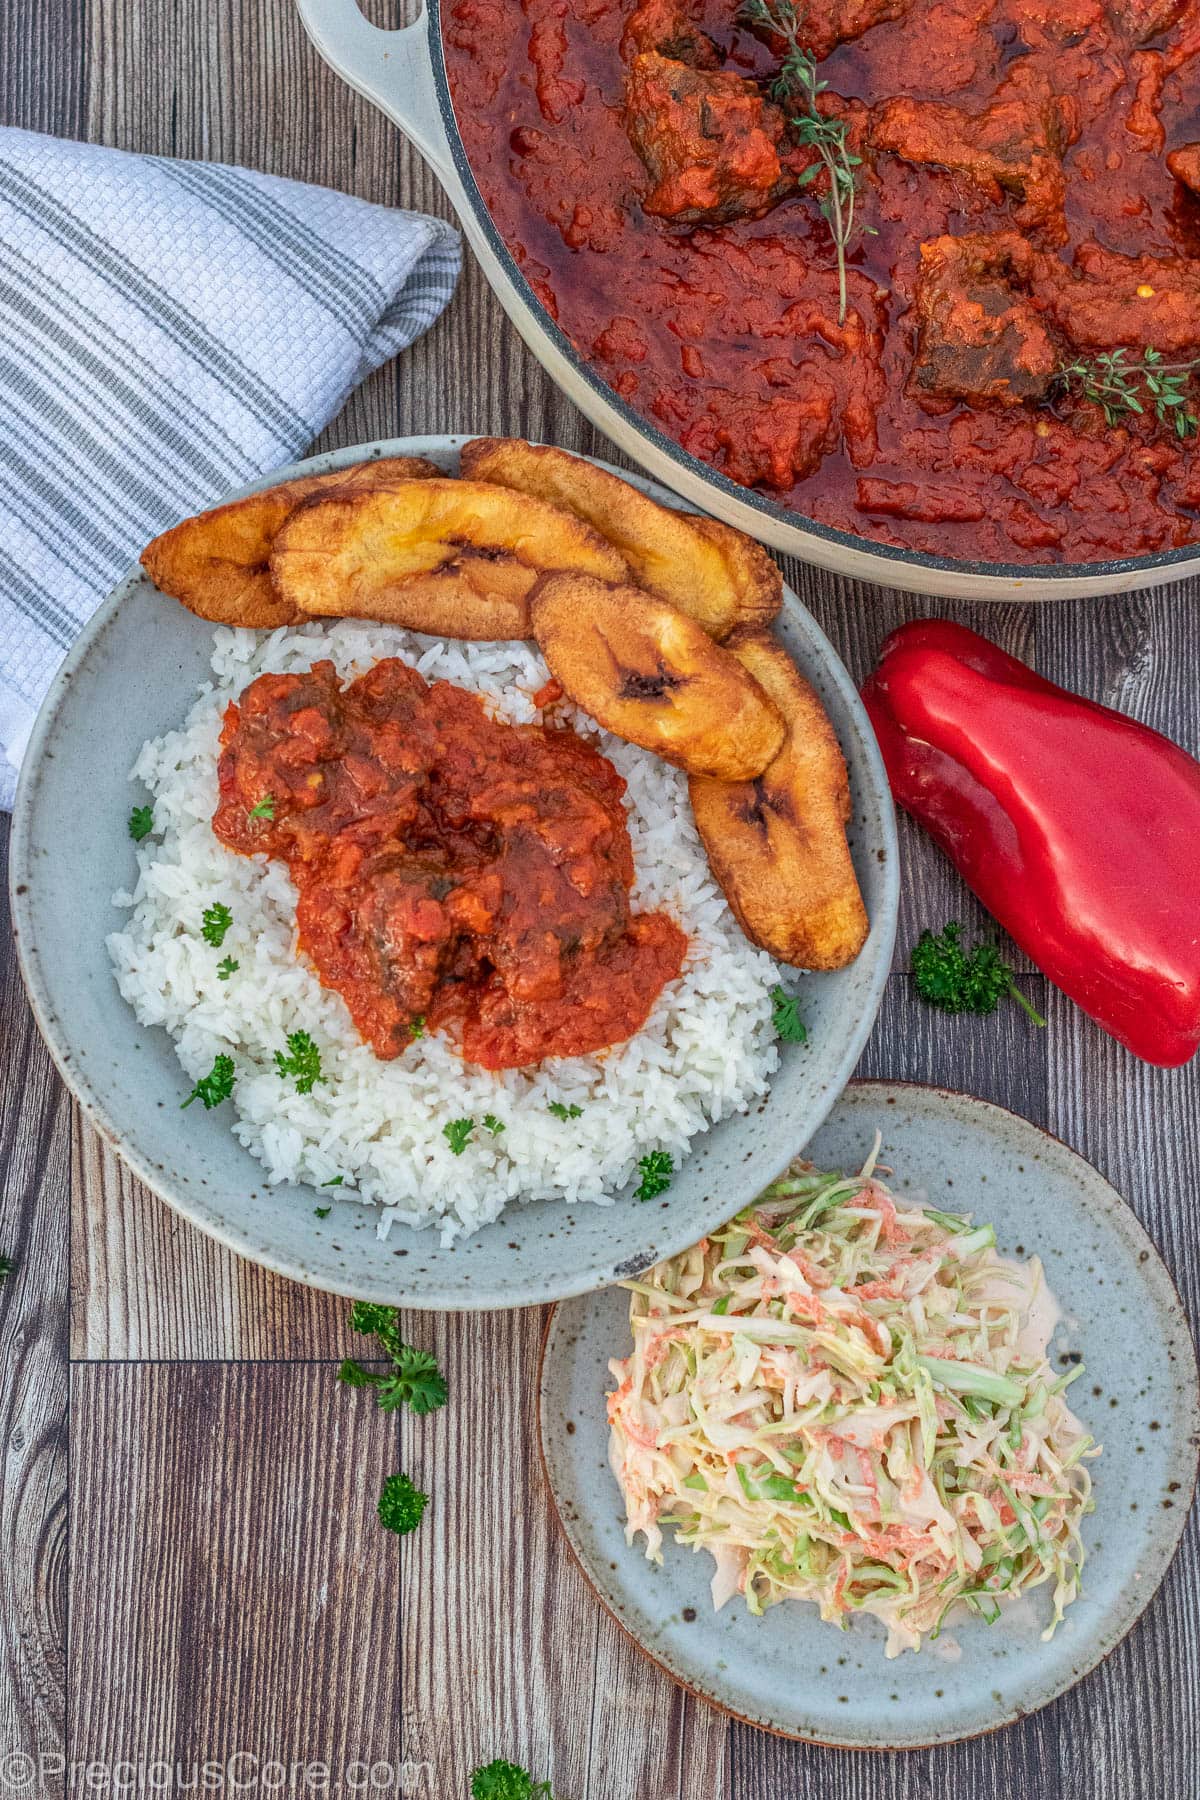 Nigerian beef stew served with rice and a side of sweet fried plantains and coleslaw.